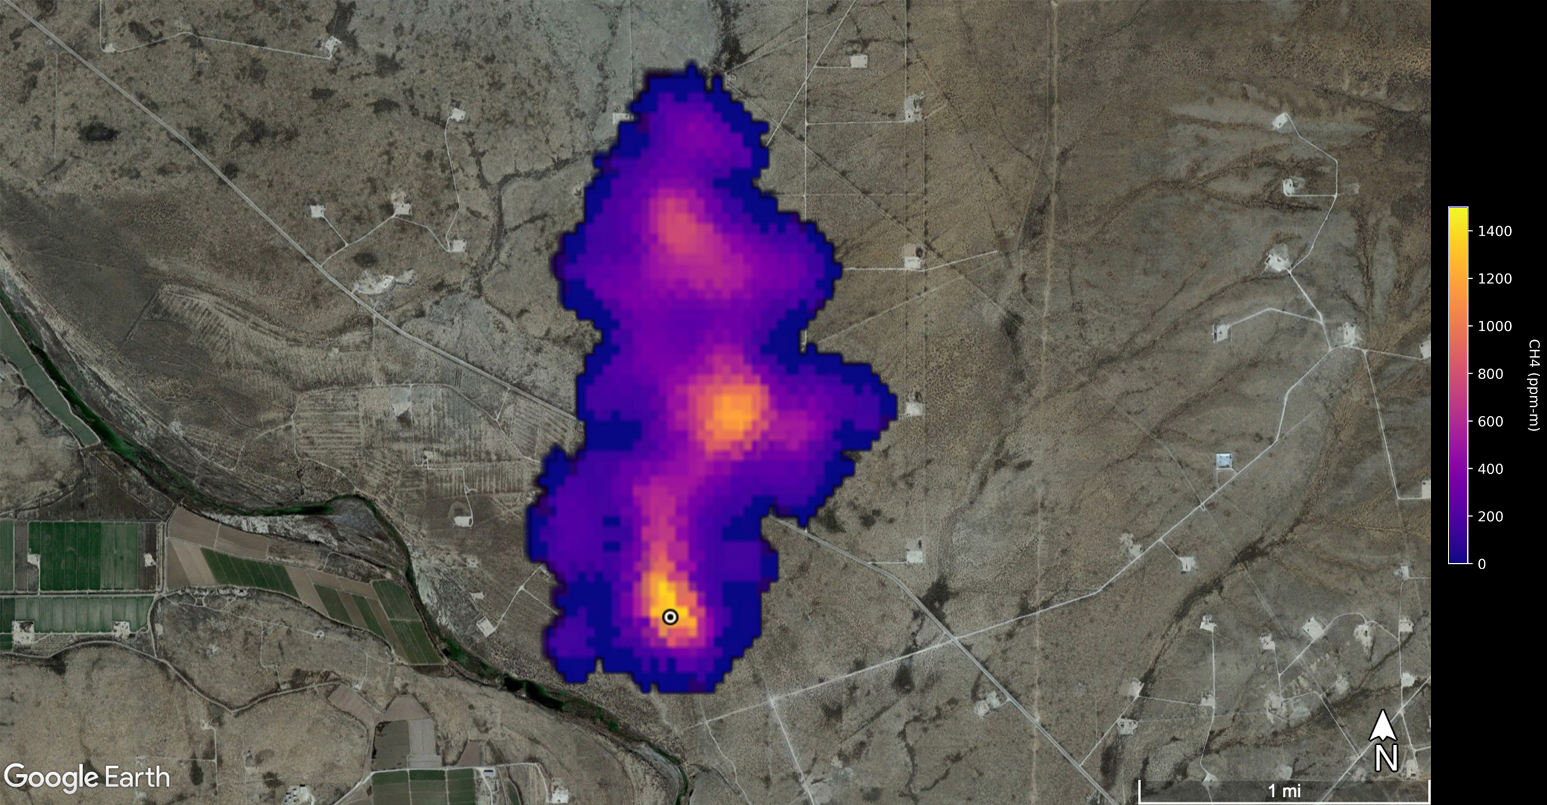 A plume of methane is detected flowing from an area southeast of Carlsbad, New Mexico.